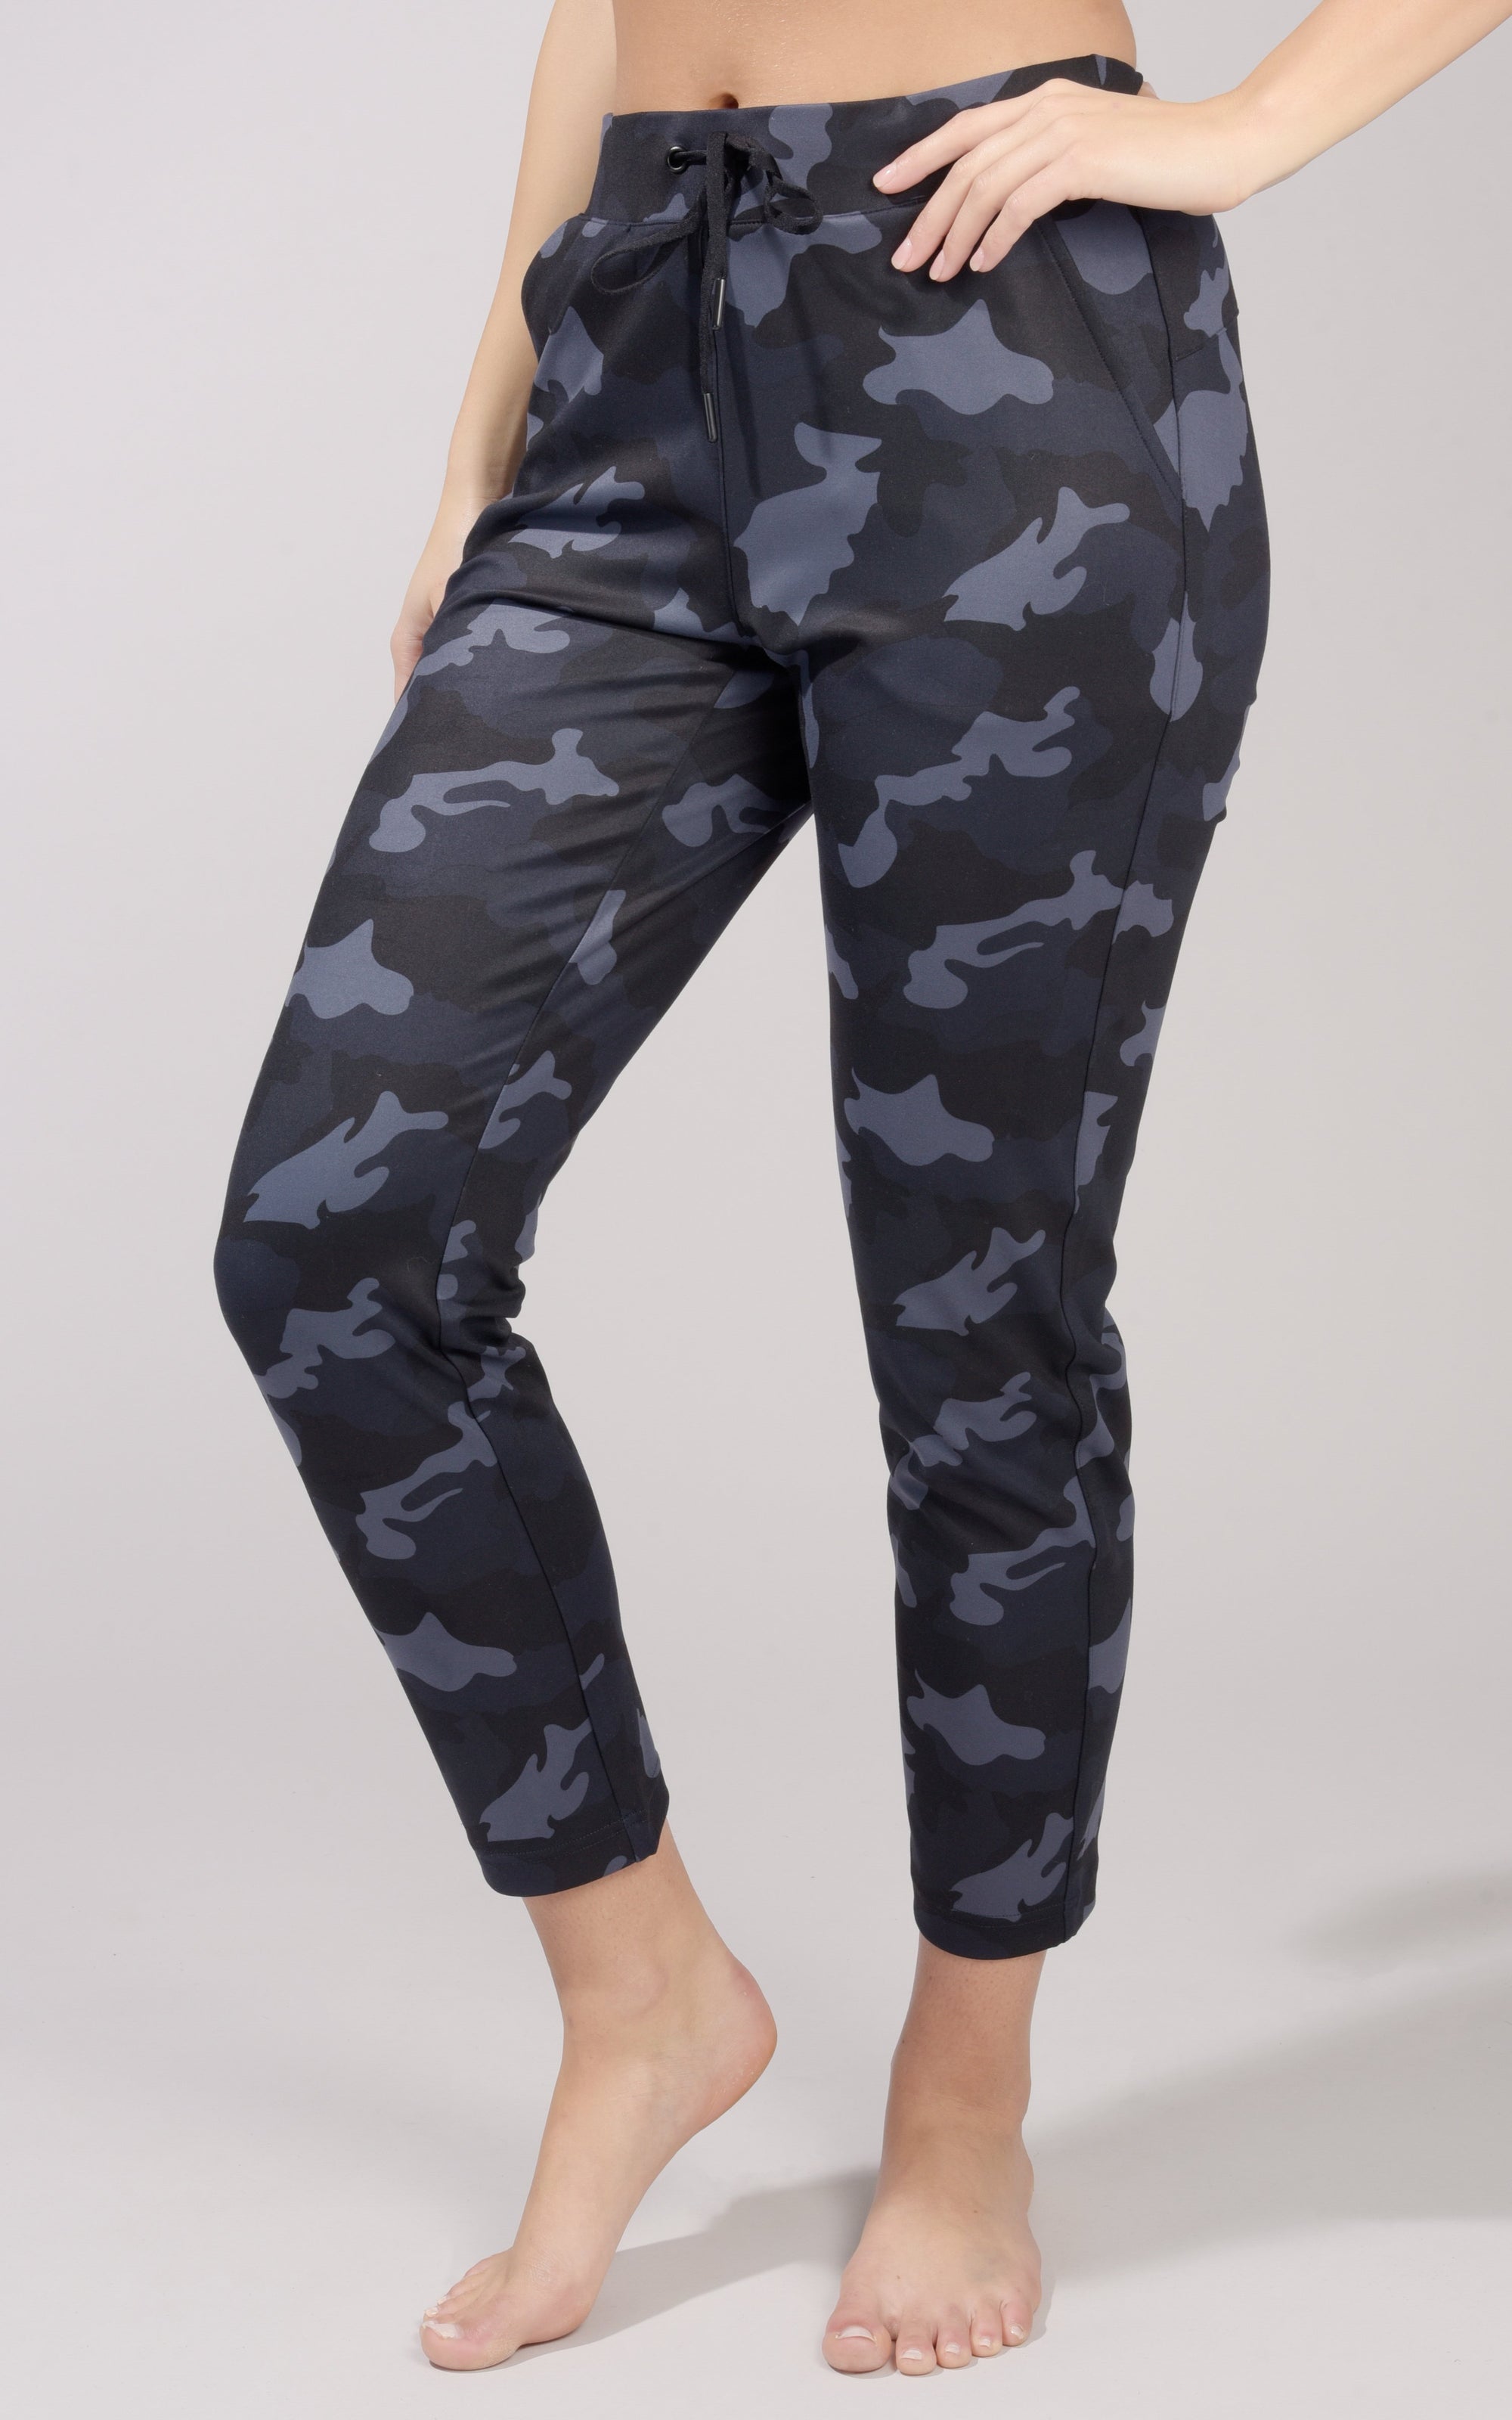 Yogalicious Lux 3X Women's Capris - Pioneer Recycling Services